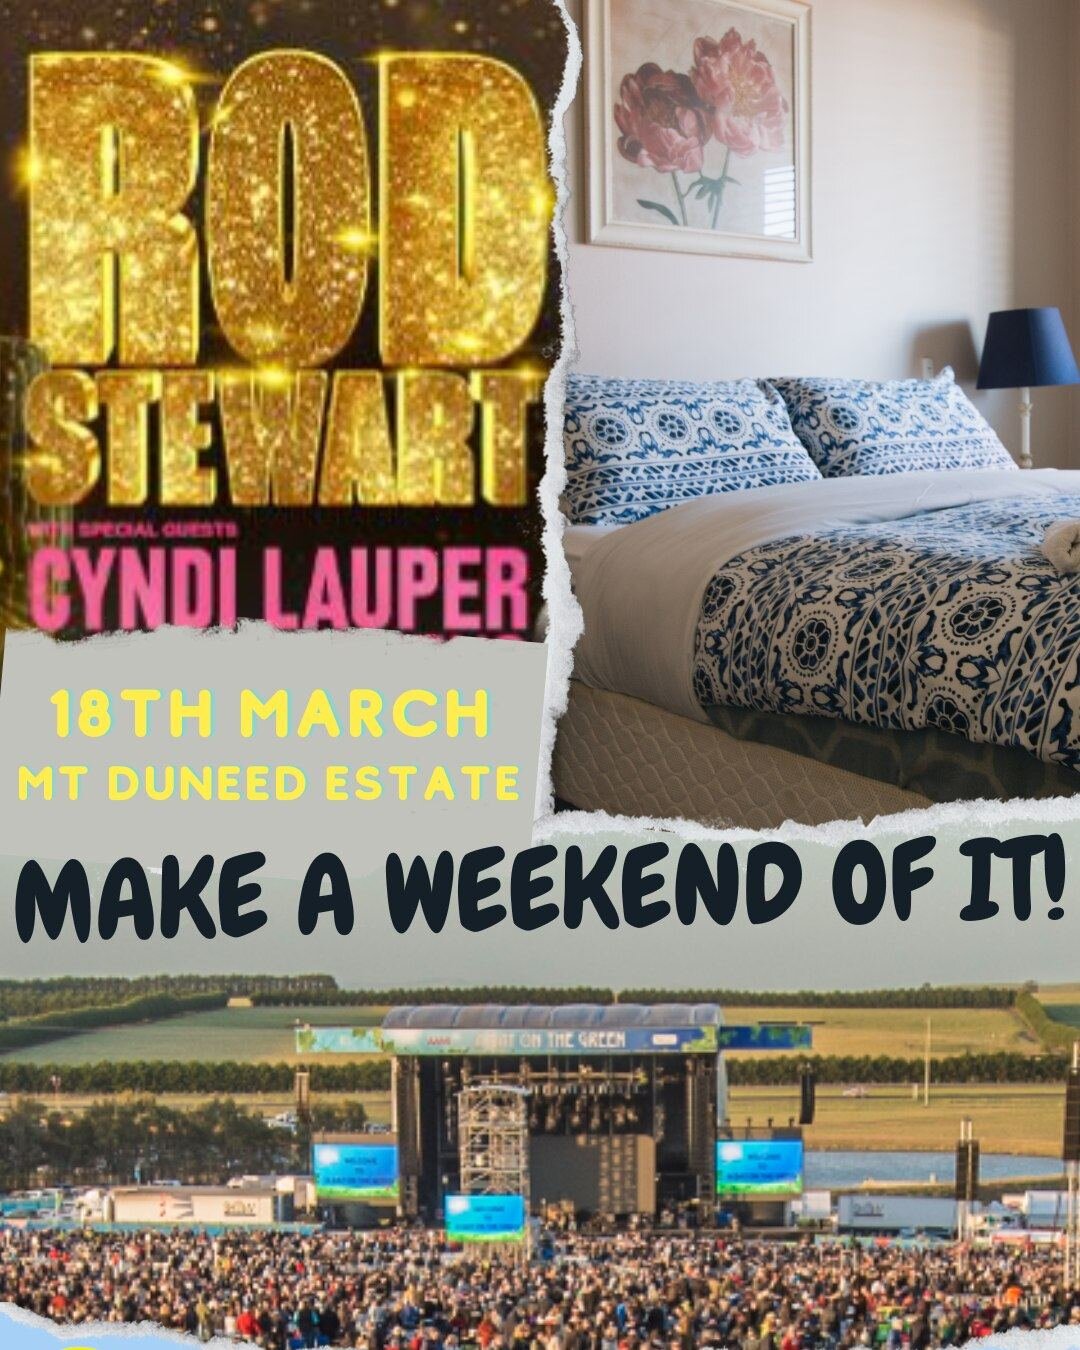 Been pumping the tunes, listening to the legendary Sir Rod Stewart this afternoon. Can't wait to see him and Cyndi Lauper live at Mt Duneed Estate on 18th March 2023 for A Day on the Green. 
Have you got your accomodation sorted yet for any of the Da